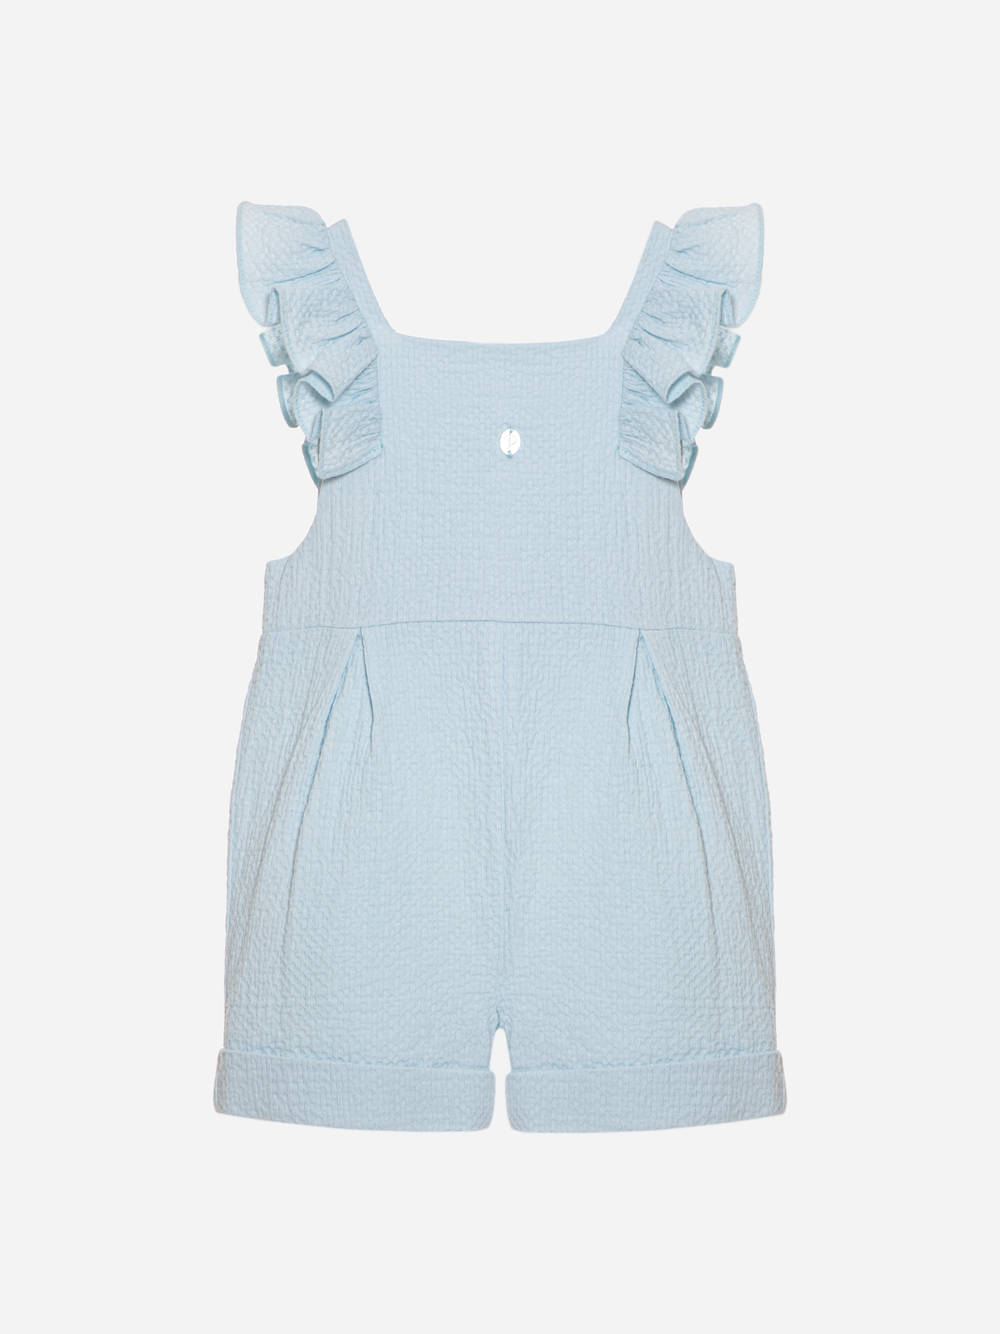 Girls green water jumpsuit with ruffles